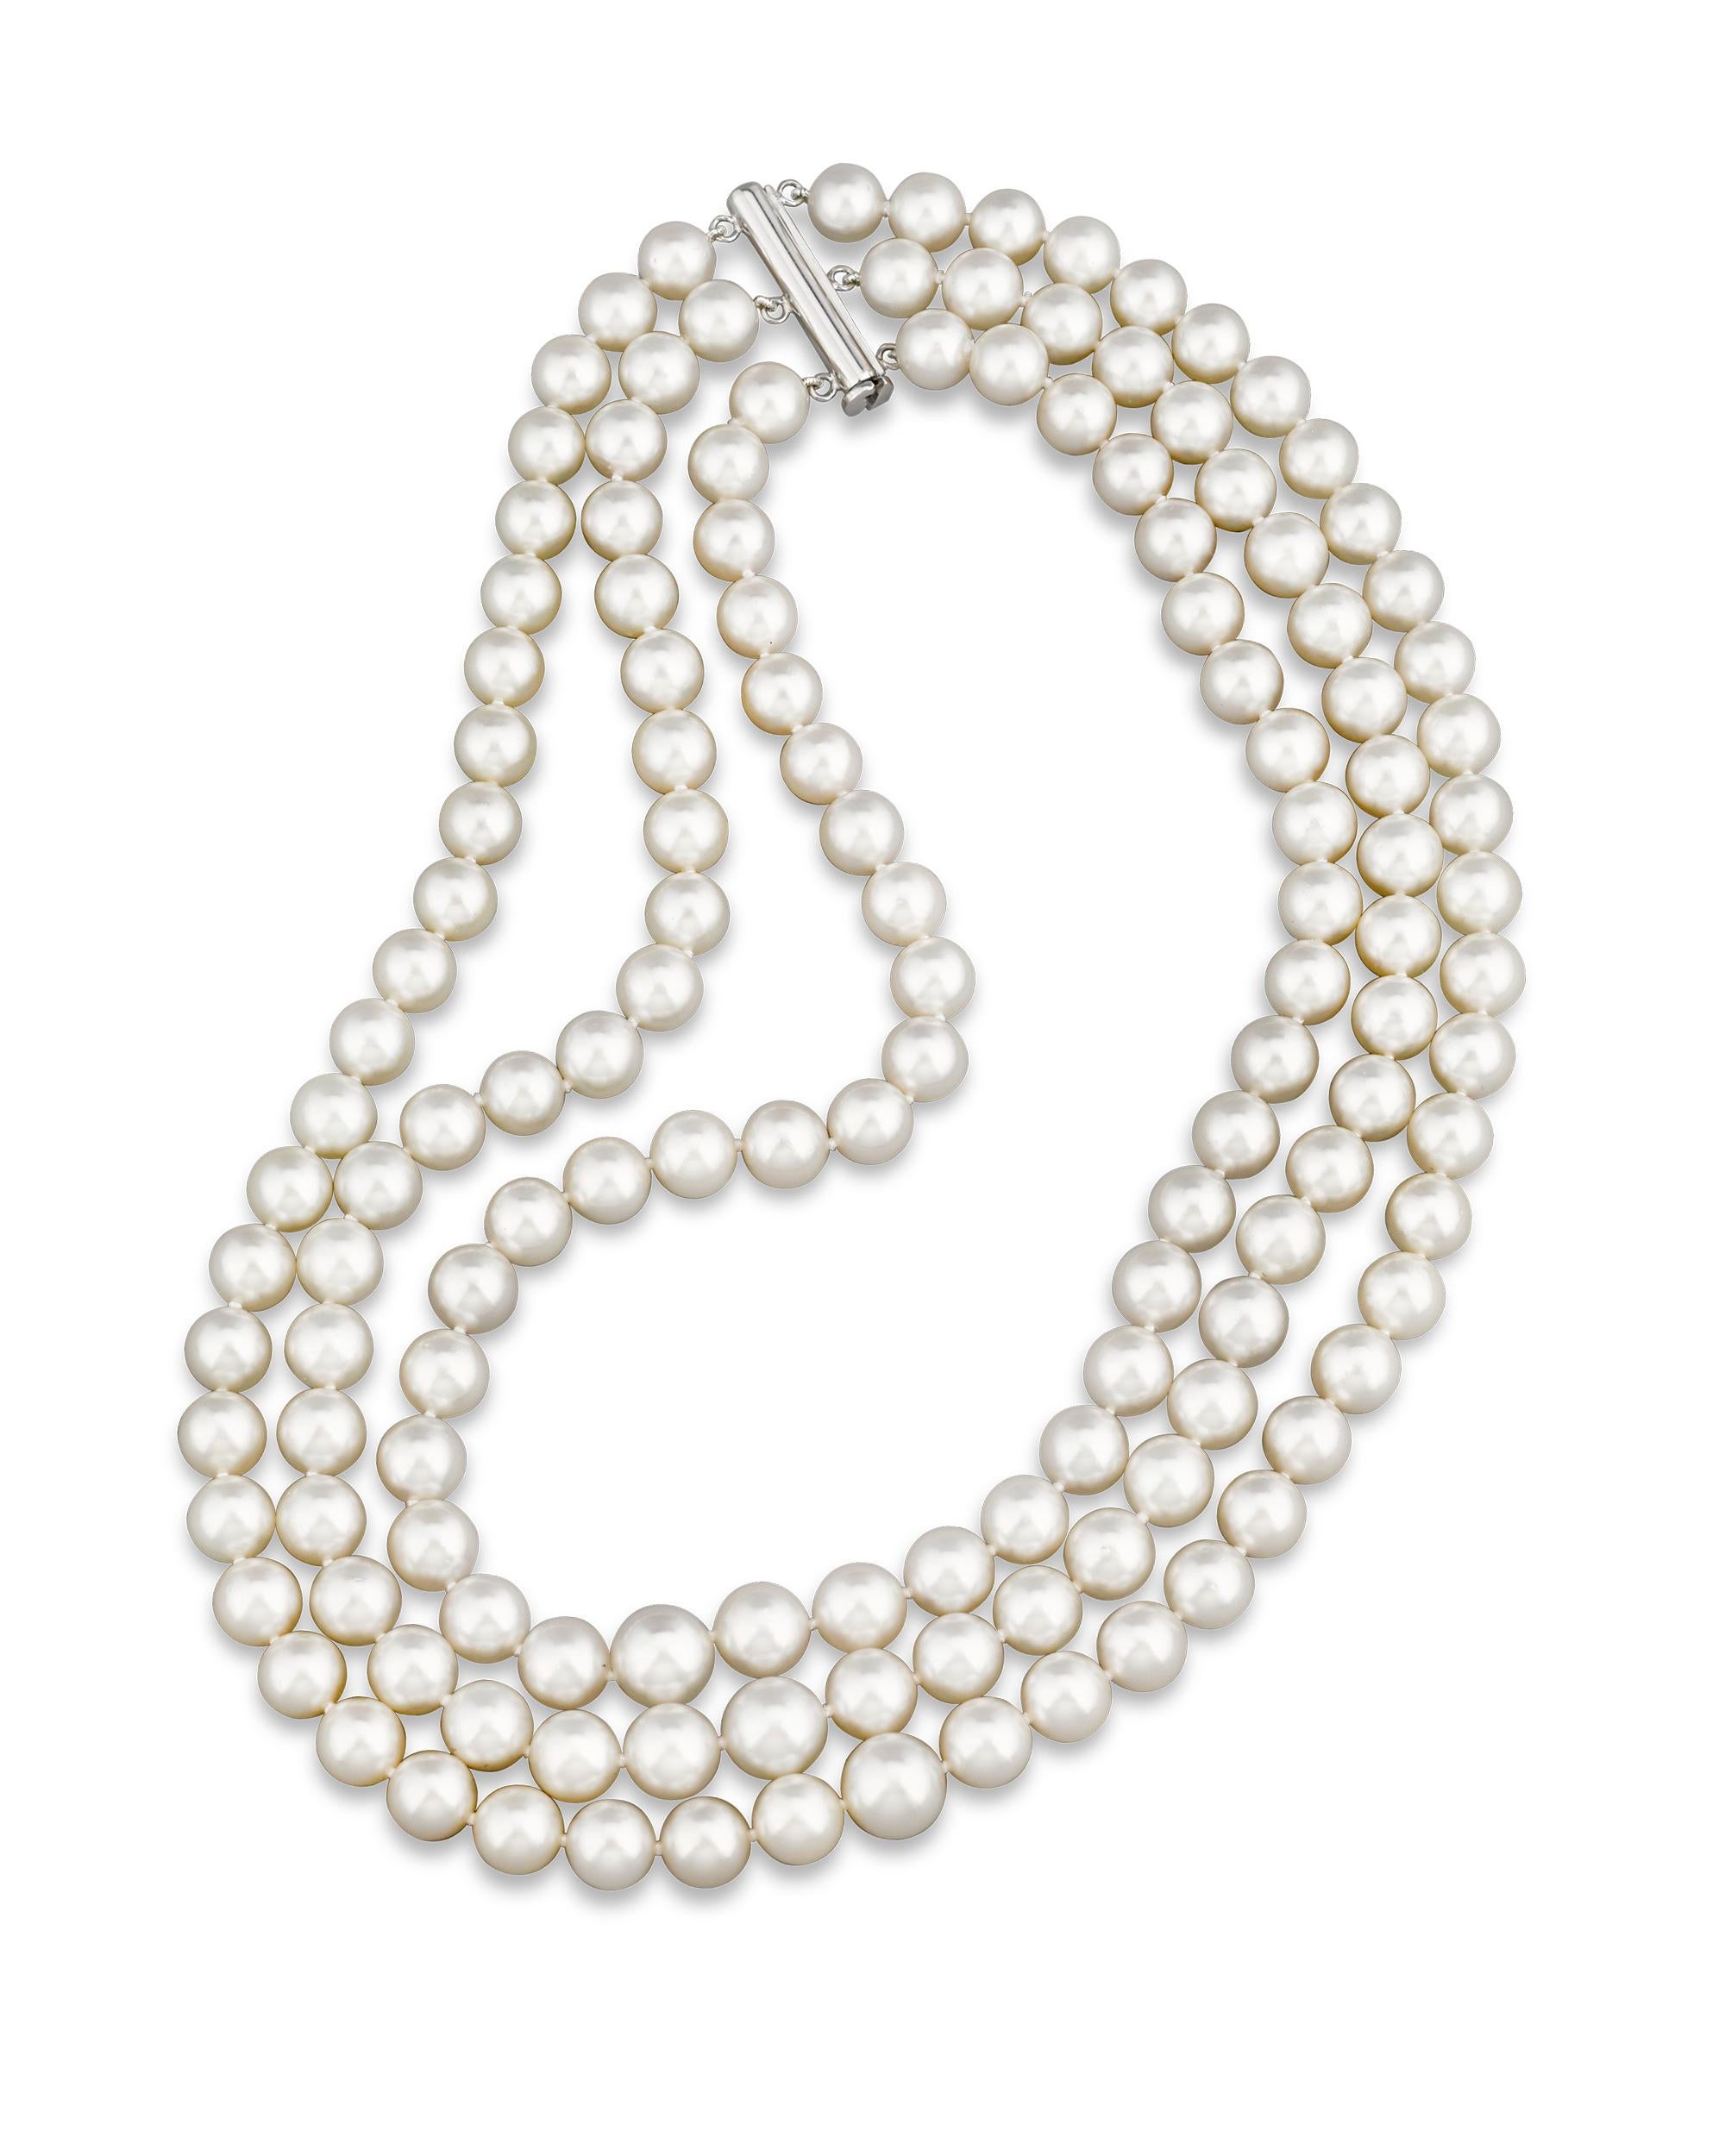 Three strands of graduated white South Sea pearls comprise this classic necklace. The perfectly matched gems range in size from 10.5mm to 8mm and are secured with a 14K white gold clasp. Hailing from the warm waters of the South Pacific, South Sea